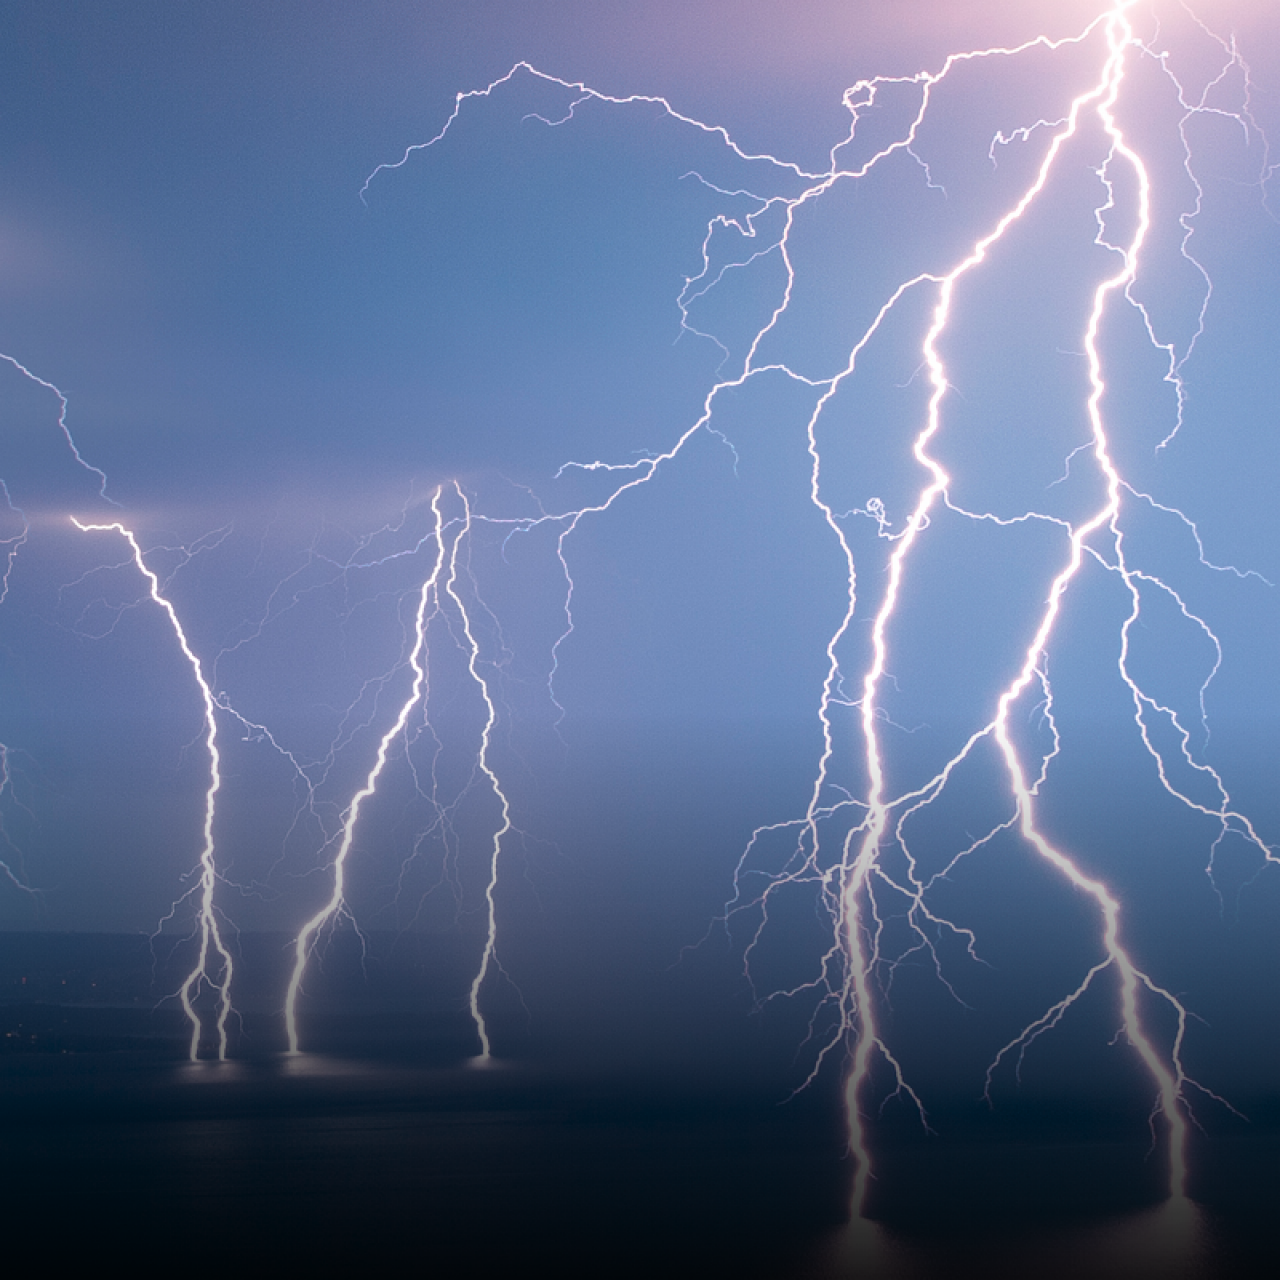 Top 10 most interesting and surprising facts about lightning